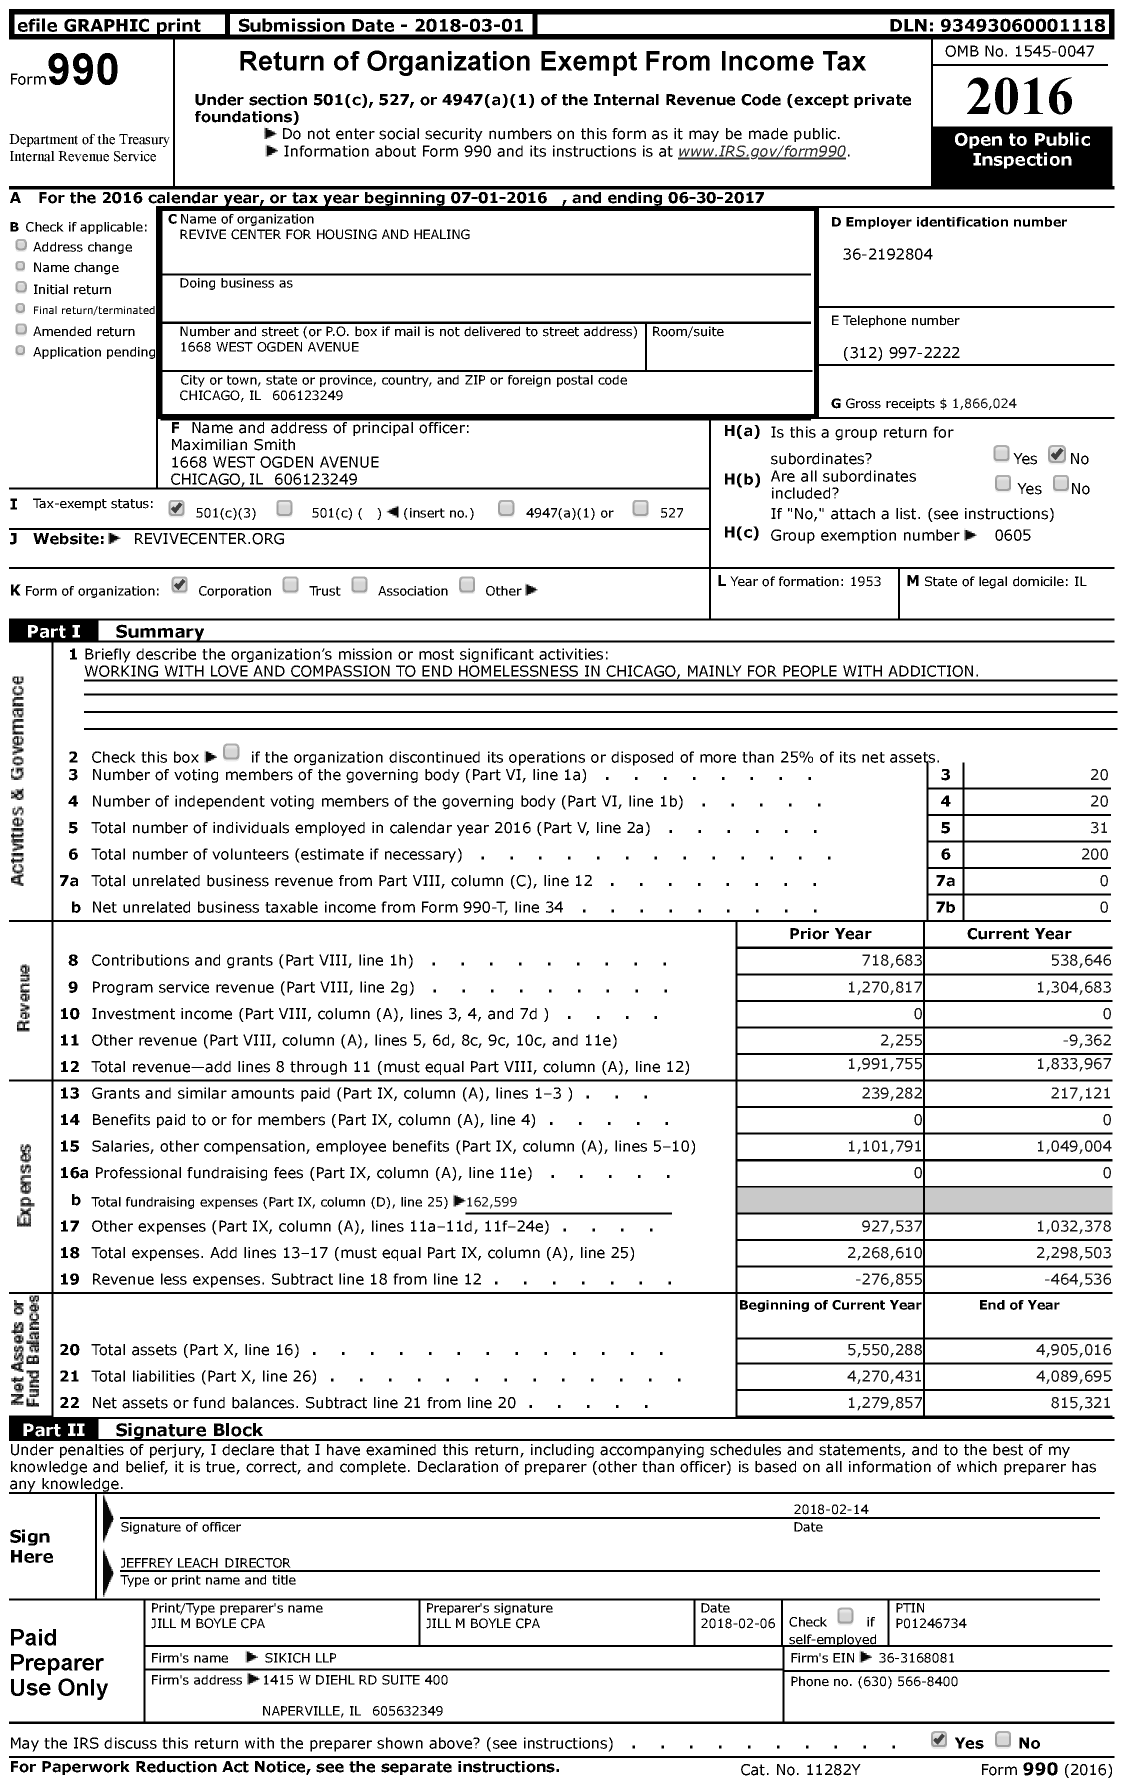 Image of first page of 2016 Form 990 for Revive Center for Housing and Healing